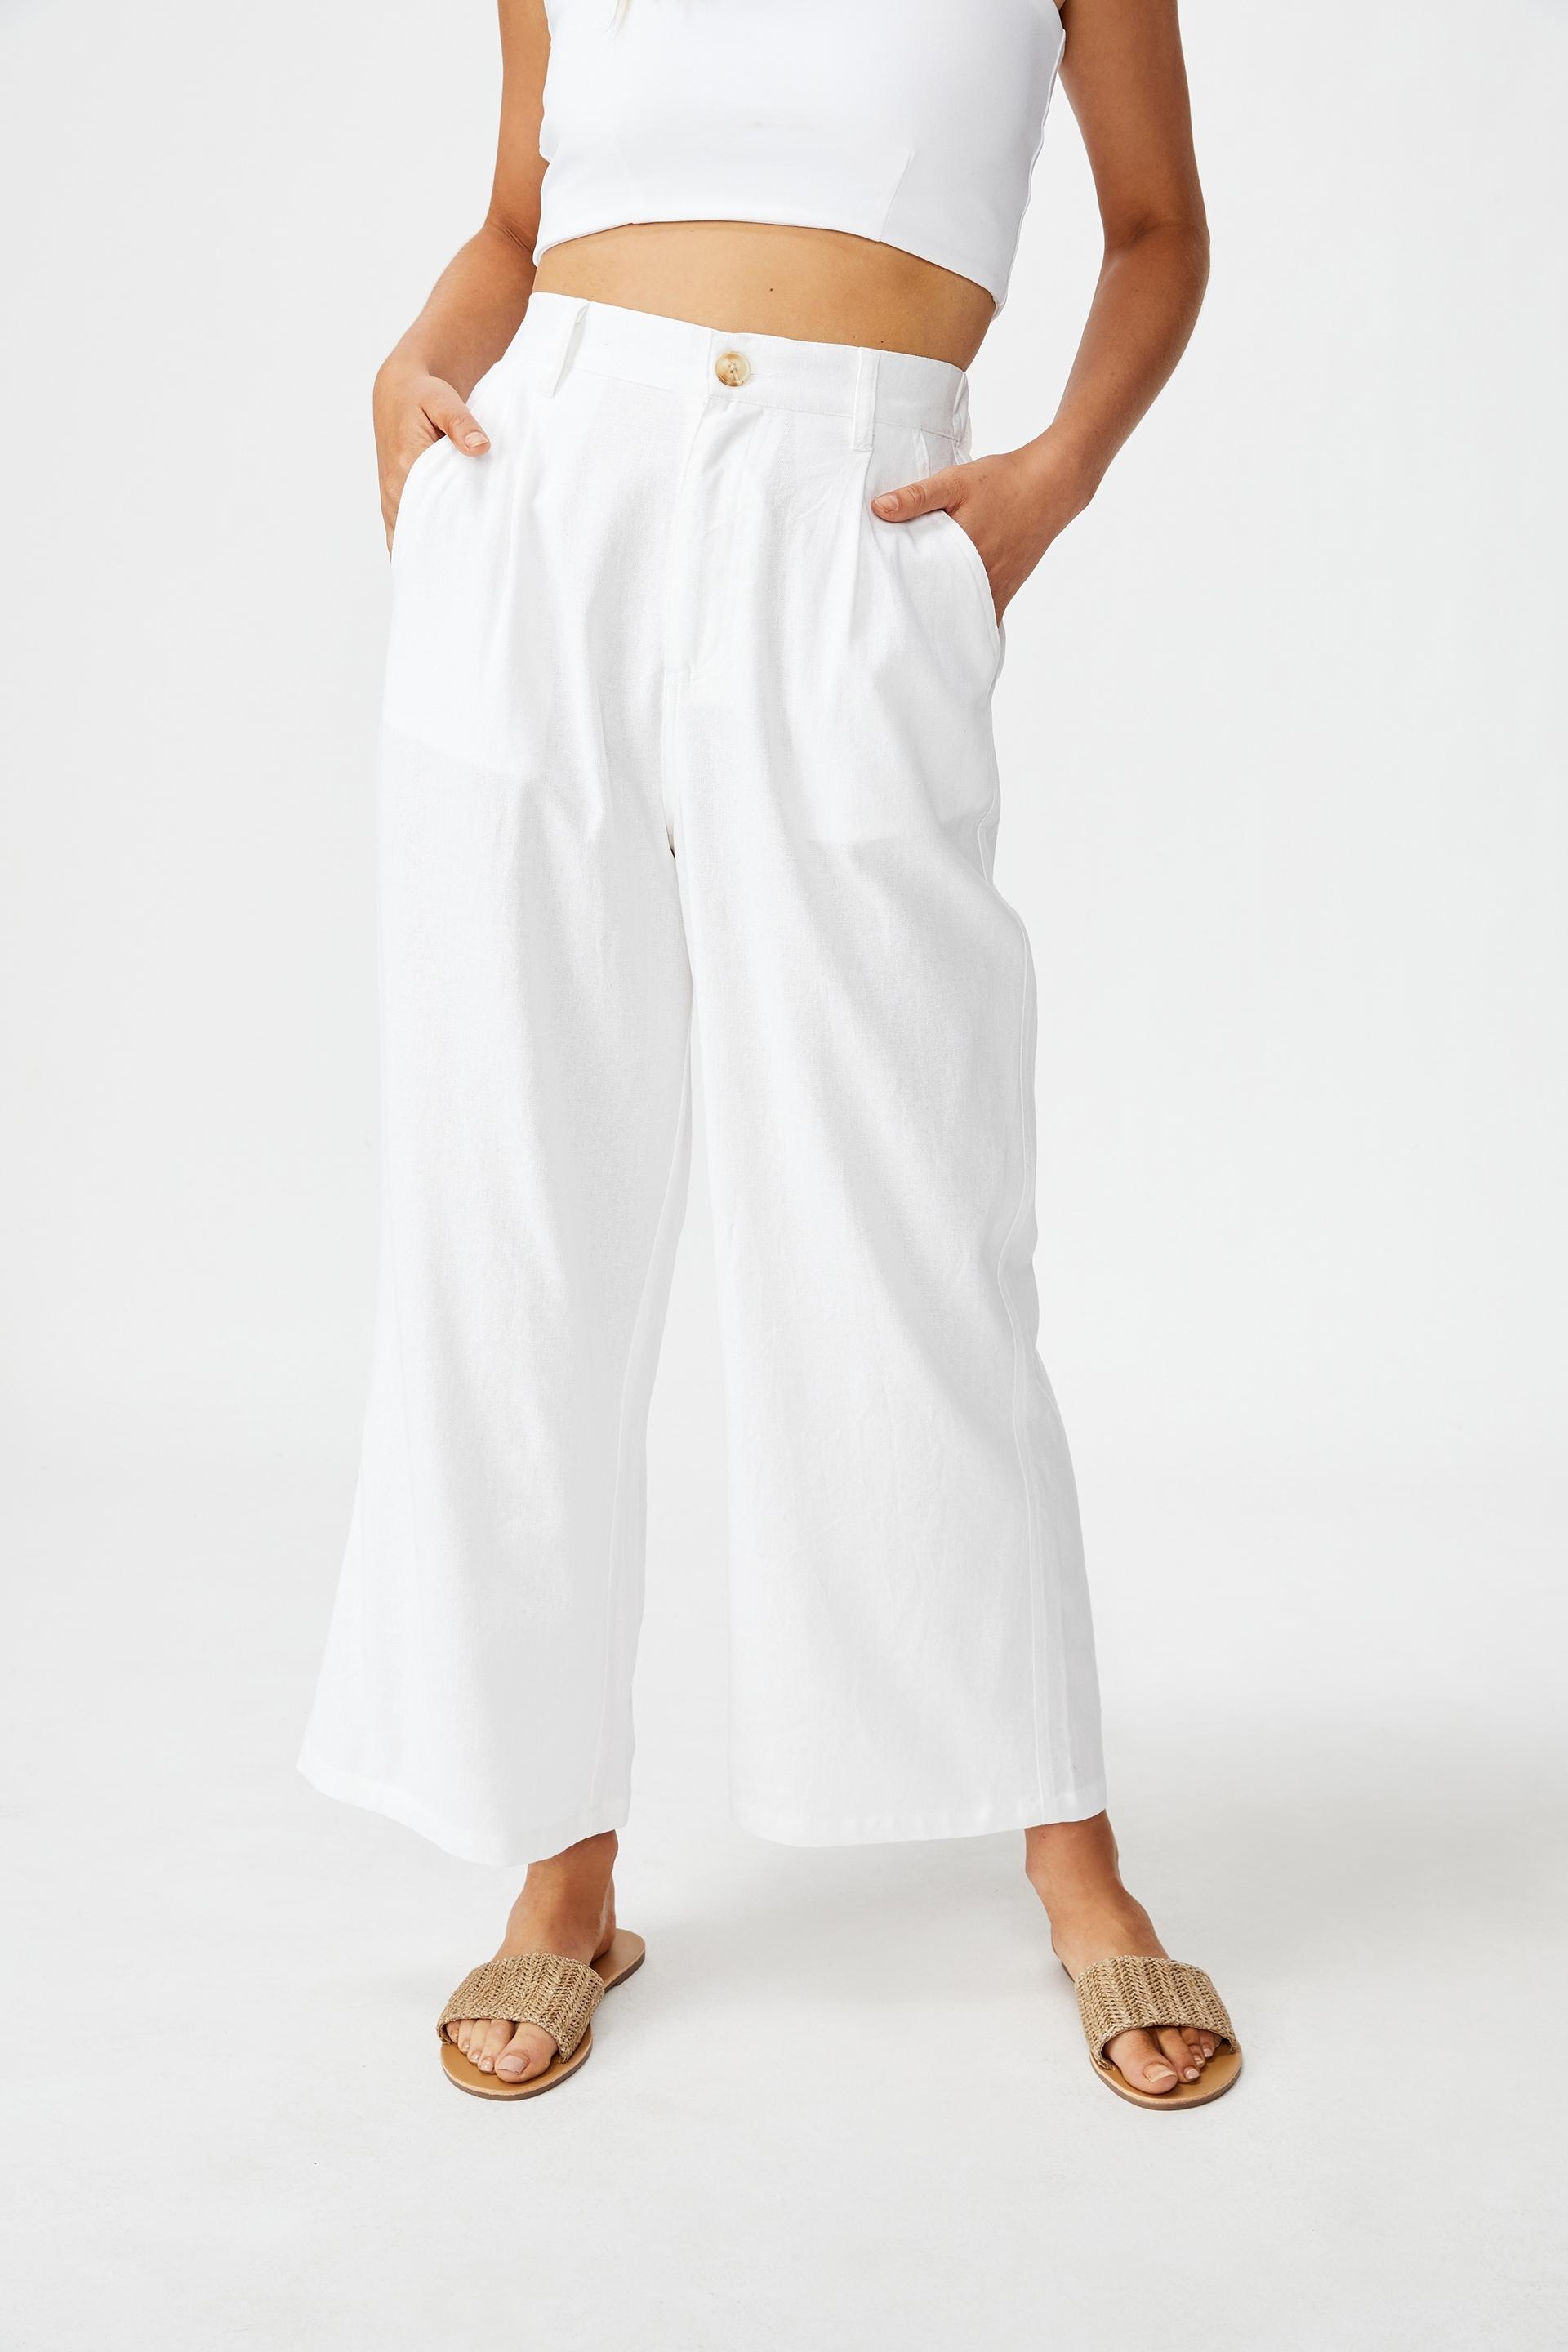 Cindy wide leg pant - white Cotton On Trousers | Superbalist.com